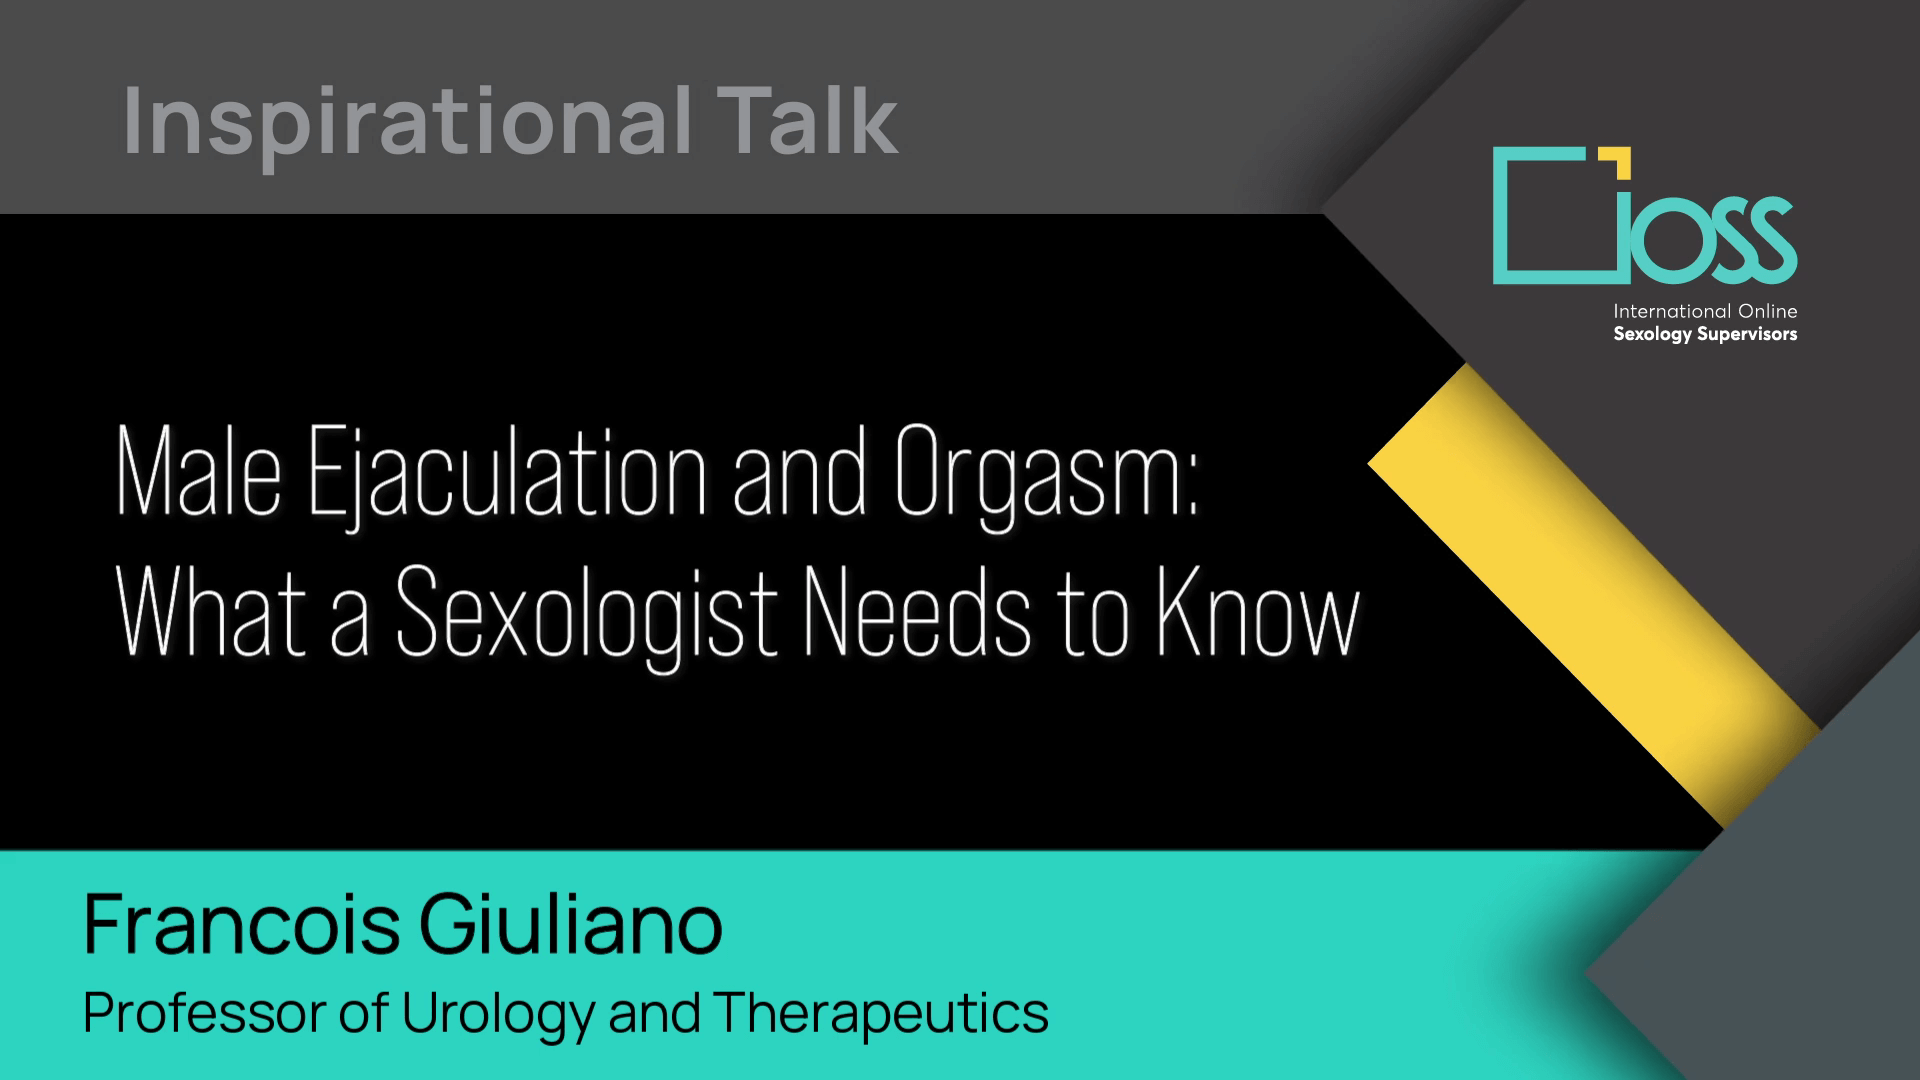 Male ejaculation and orgasm: What a sexologist needs to know